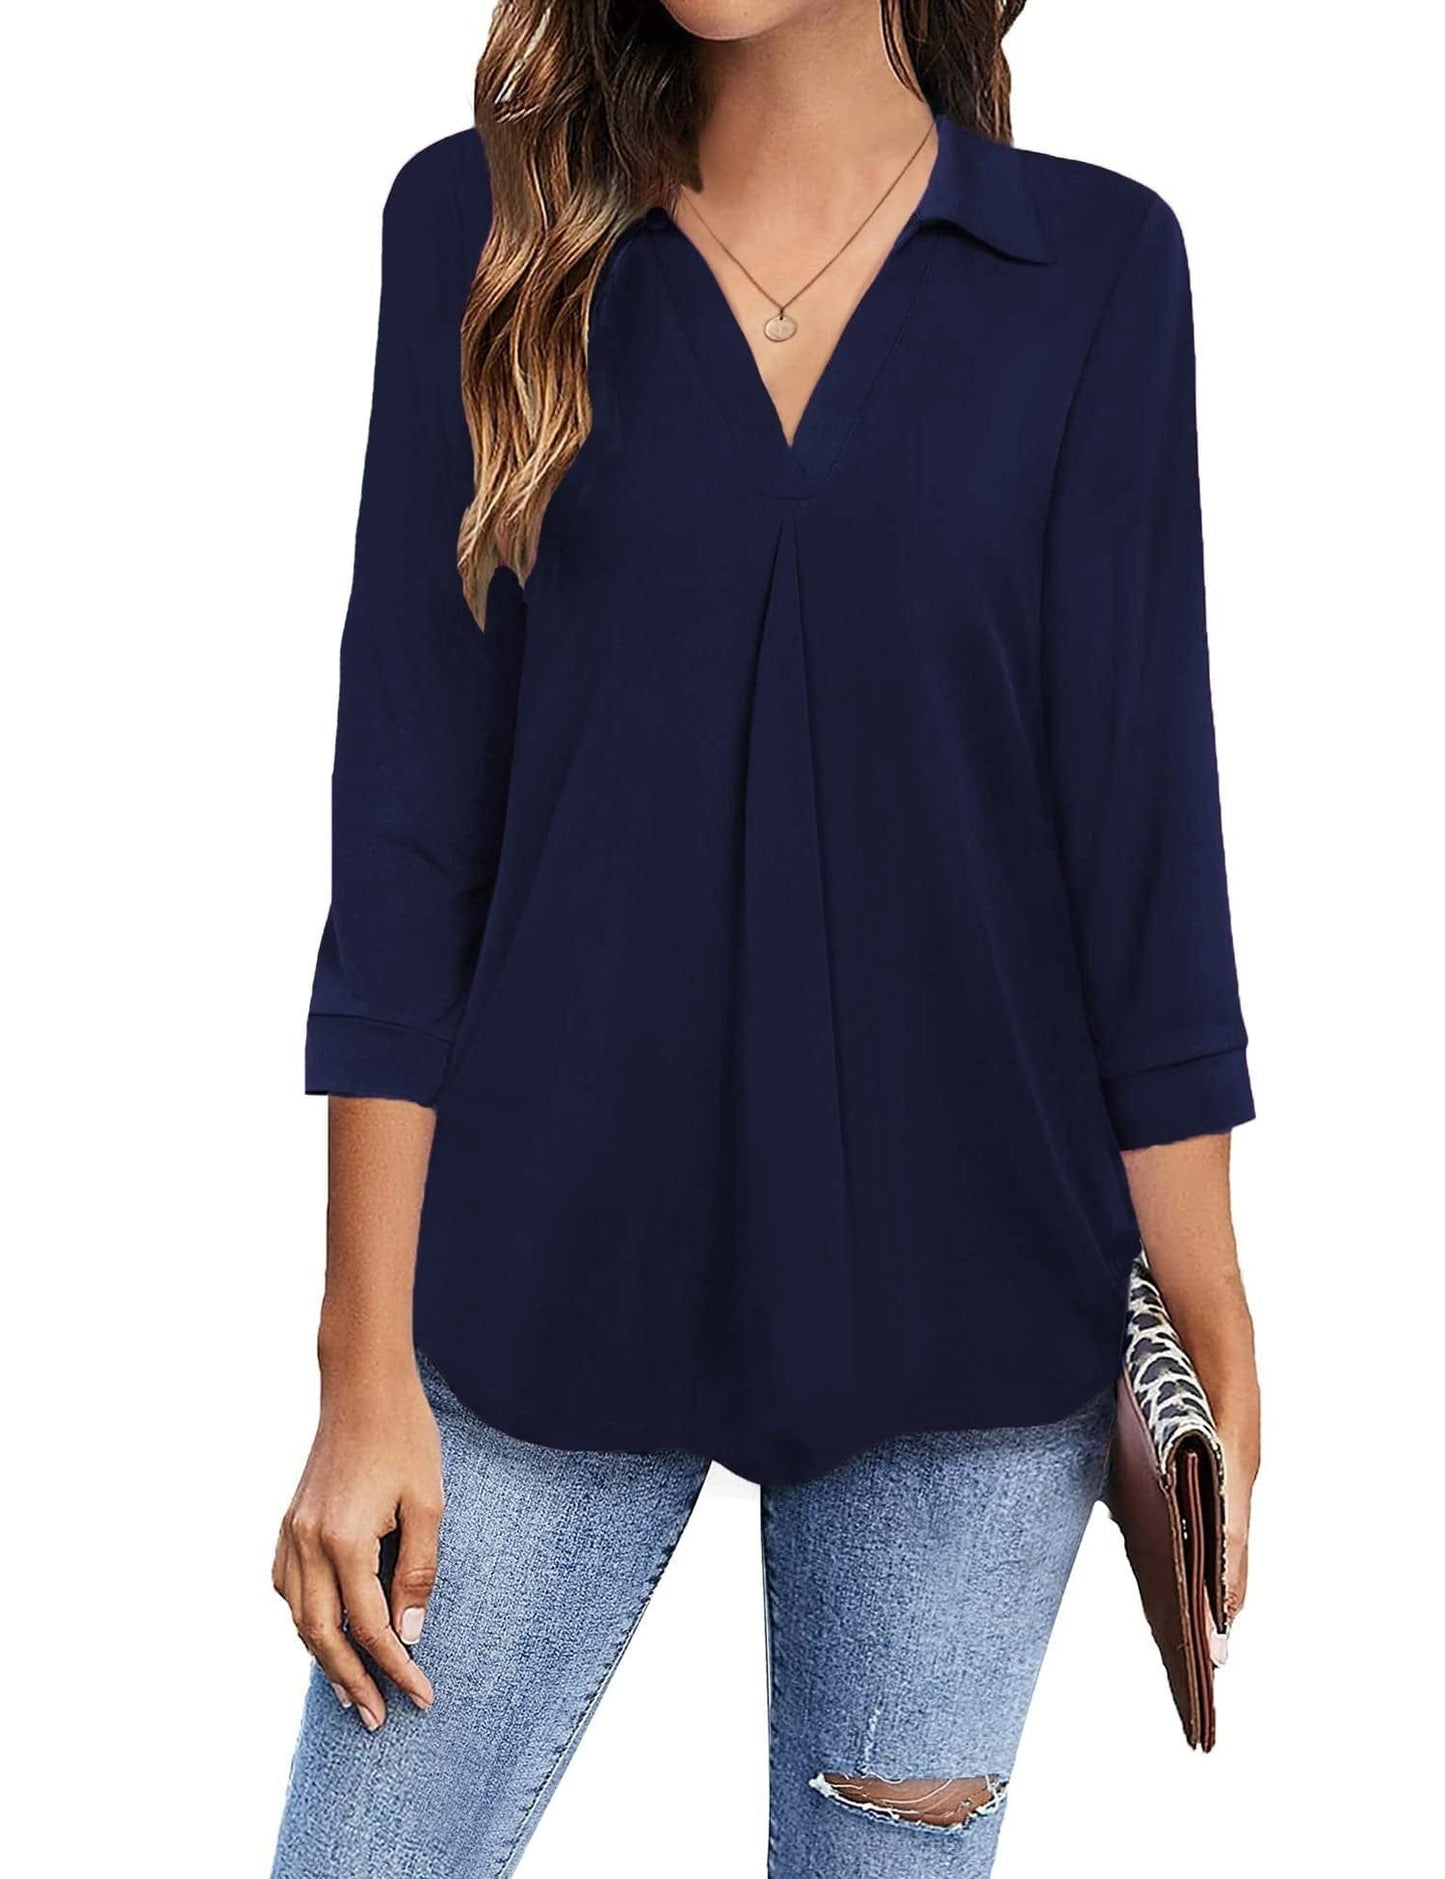 MsDressly Blouses Collared V Neck Casual Loose Blouse BLO2211191918NBLUS